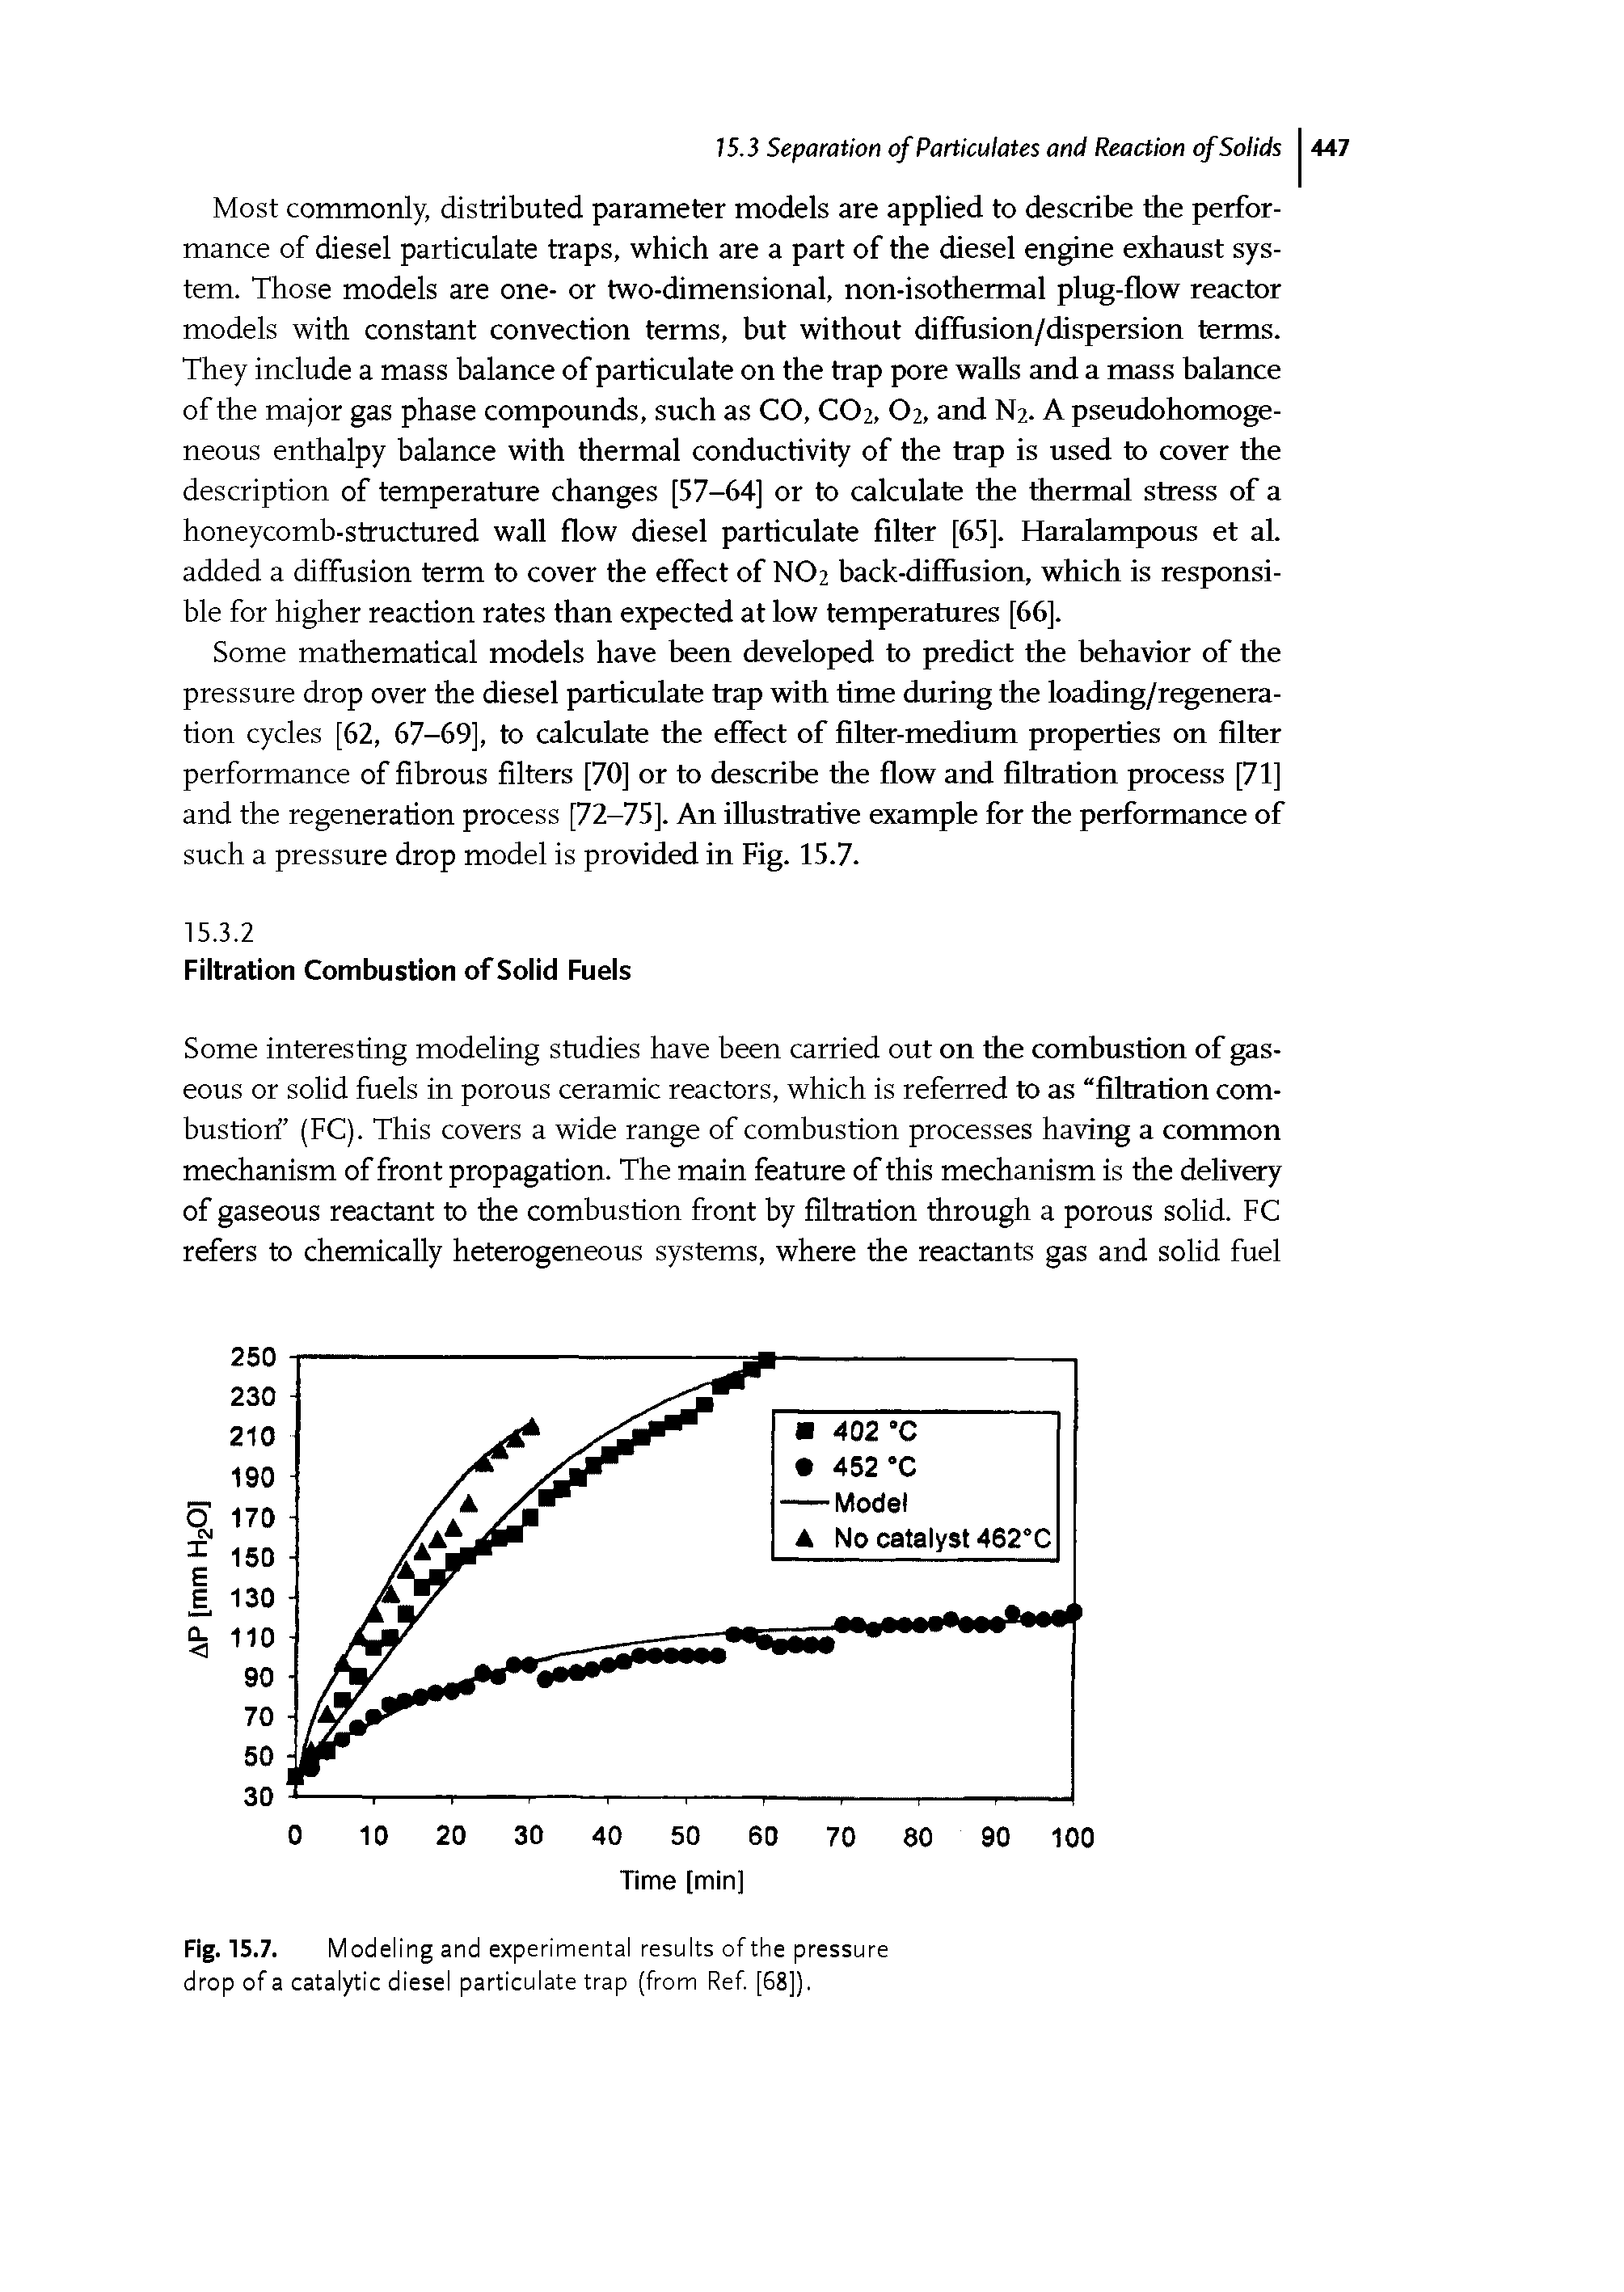 Fig. 15.7. Modeling and experimental results of the pressure drop of a catalytic diesel particulate trap (from Ref. [68]).